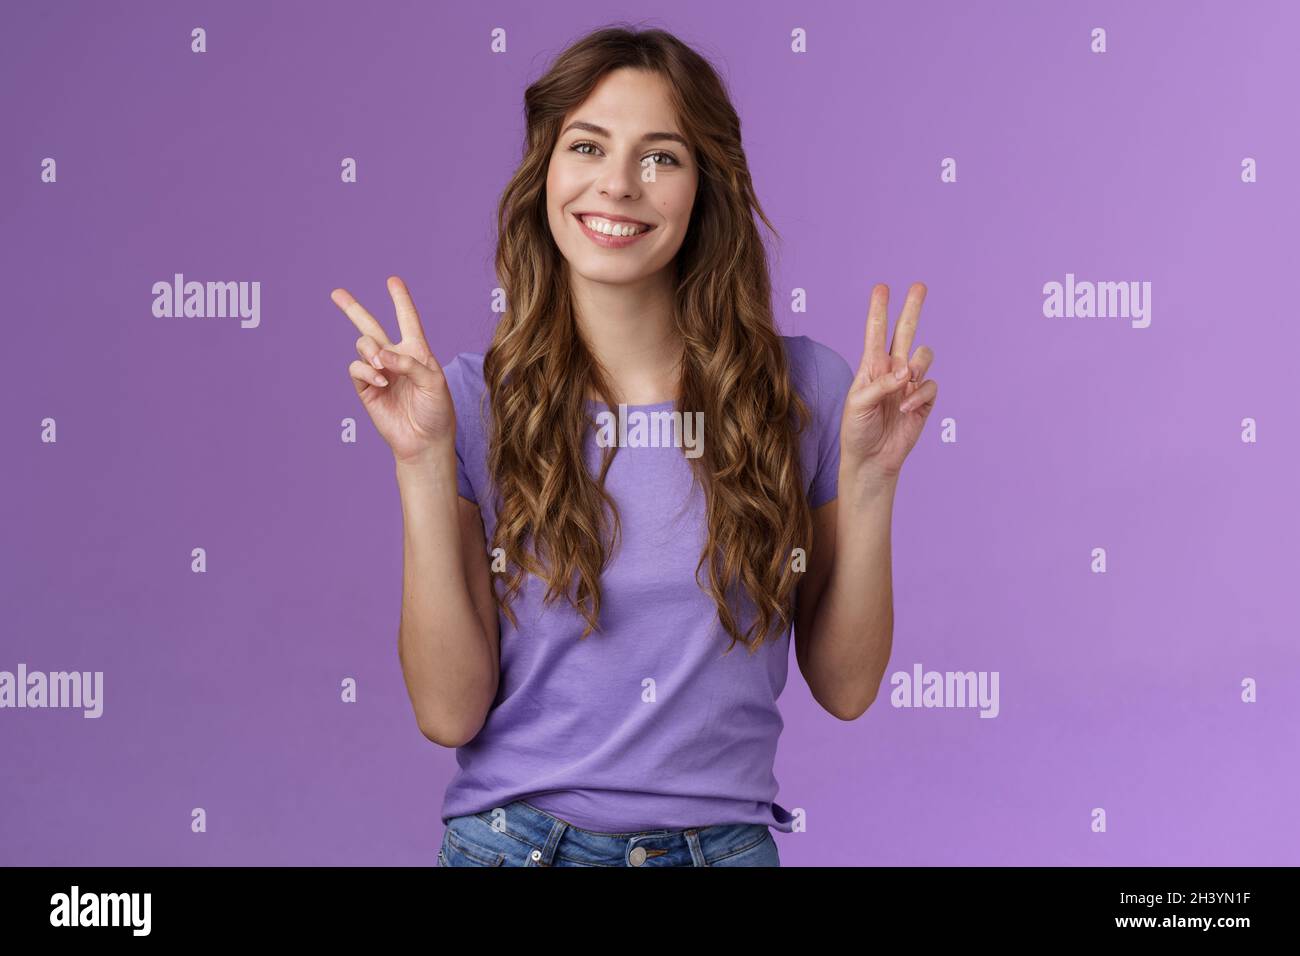 Peace friends. Relaxed friendly cute self-assured girl long curly hairstyle show victory sign smiling broadly cheering express p Stock Photo